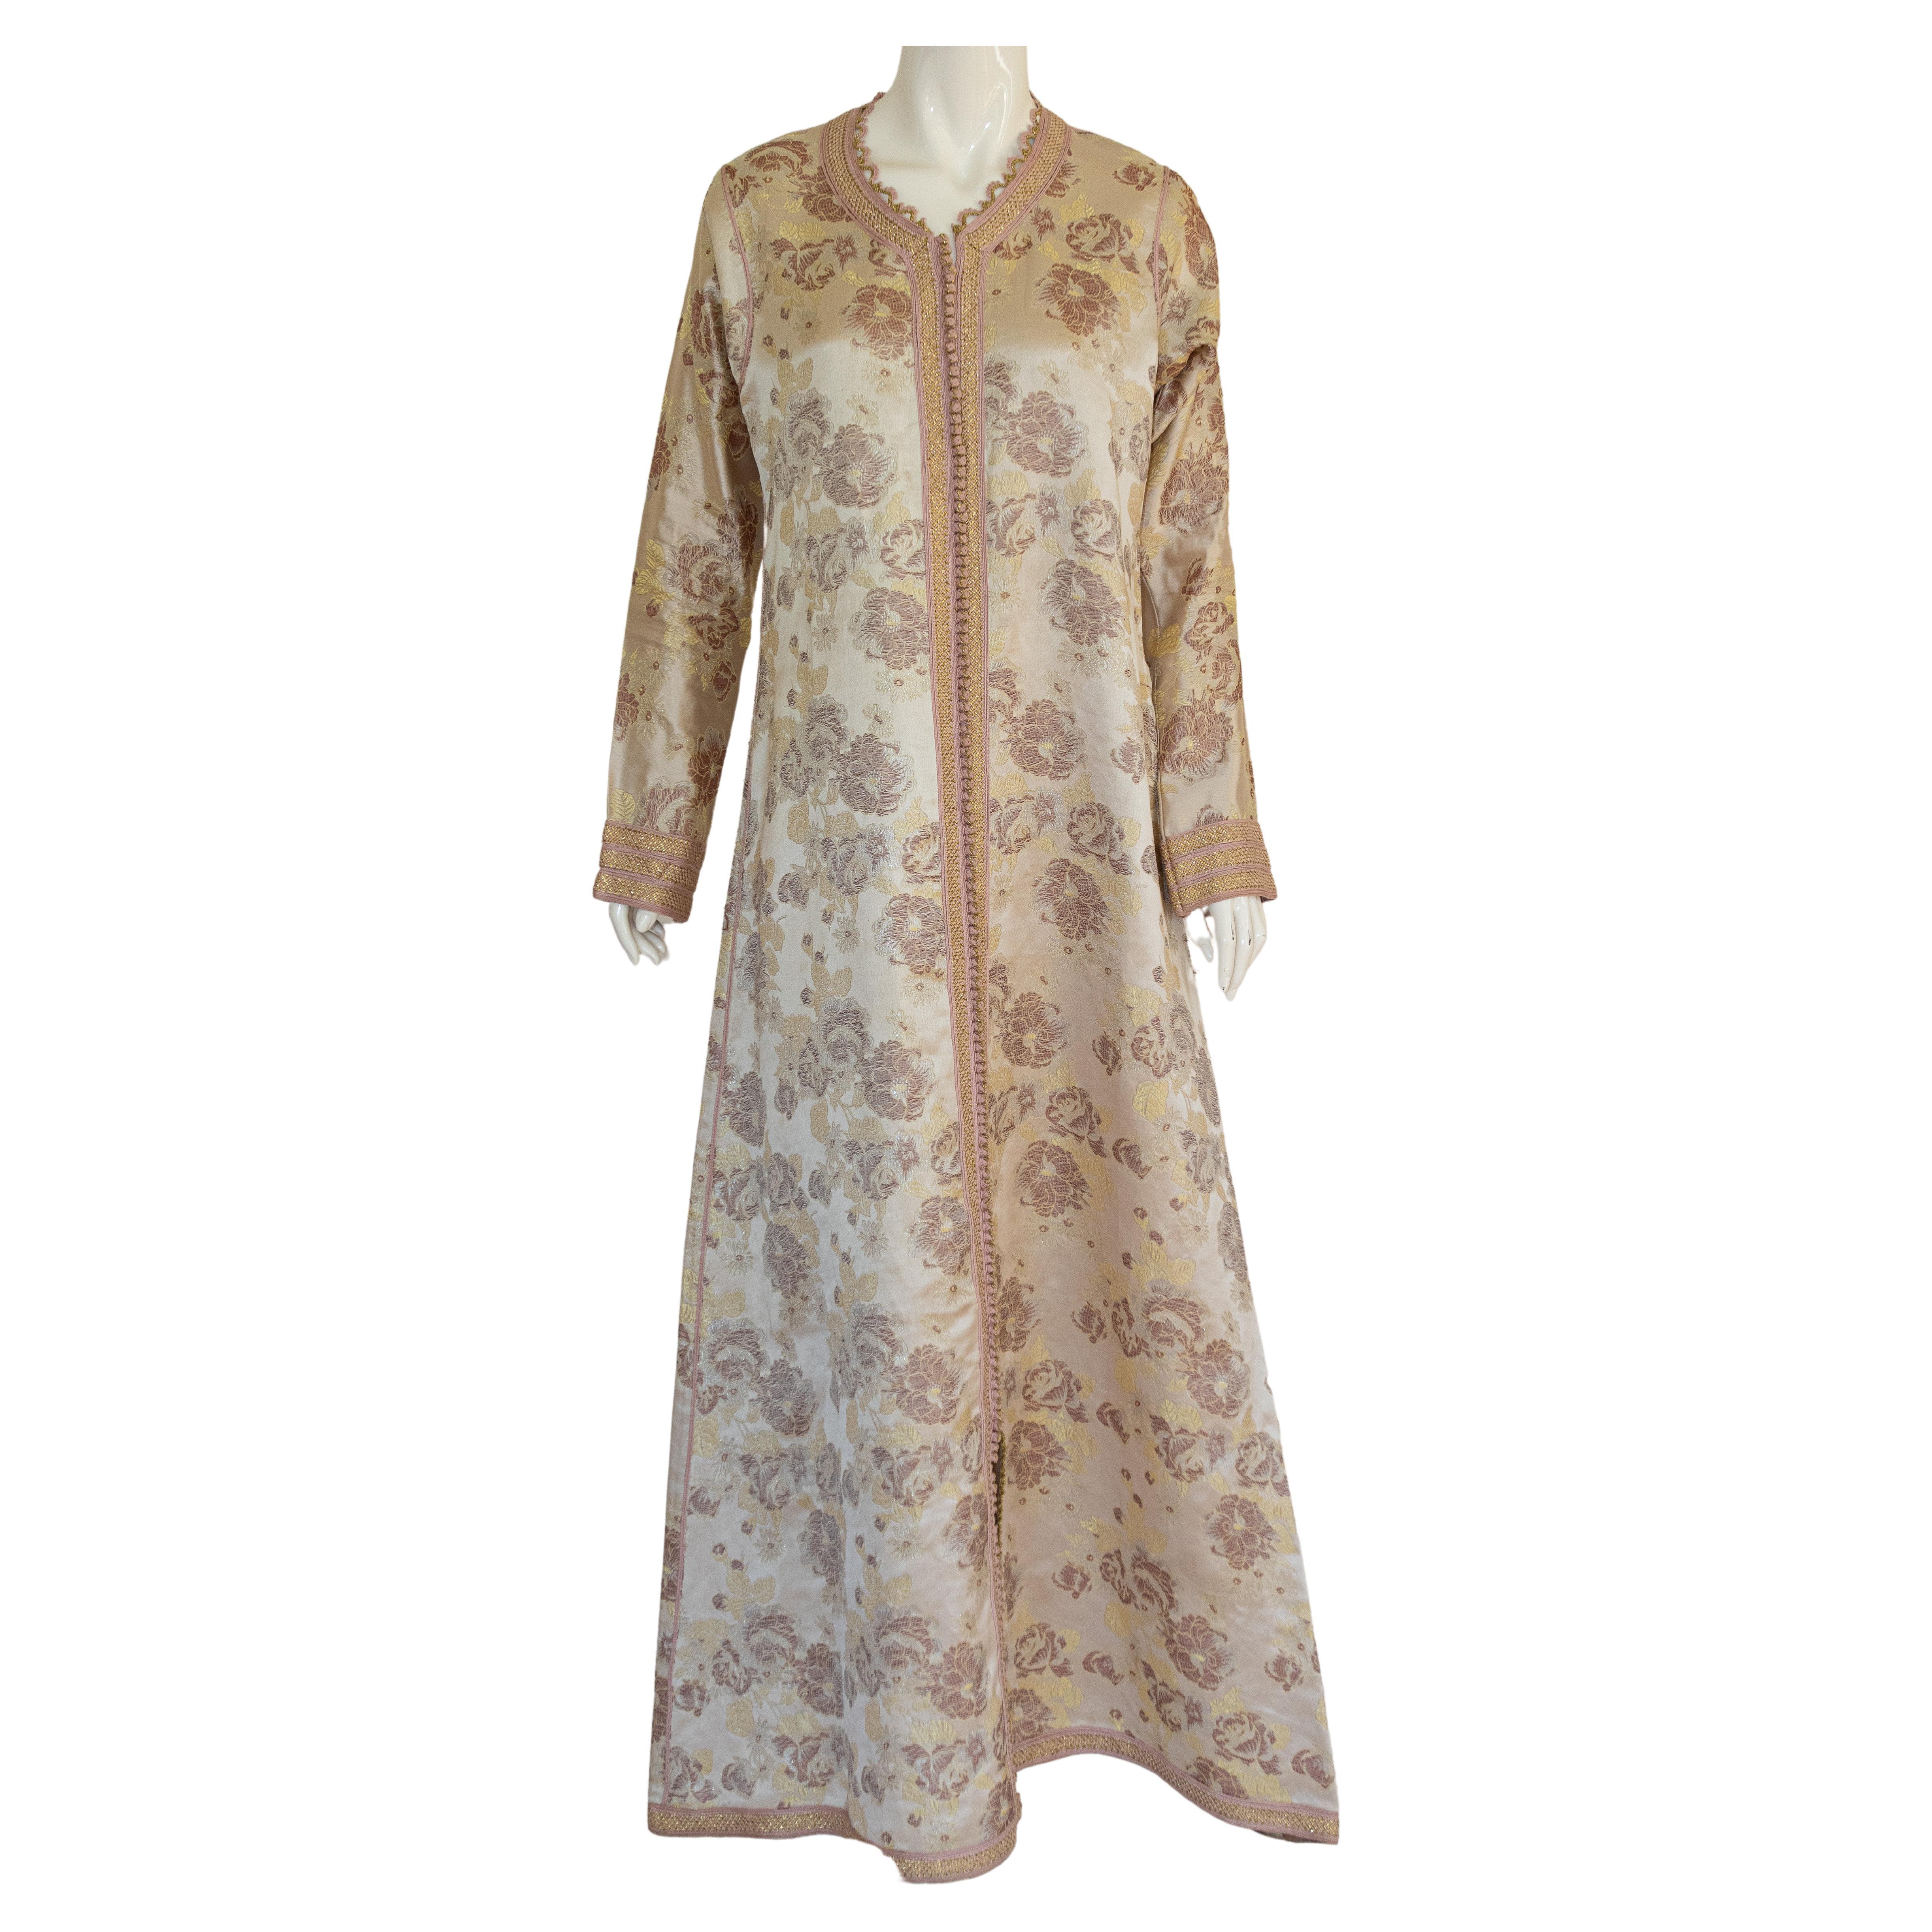 Amazing vintage Moroccan Caftan, gold silk damask threads trim, Circa 1960's
The gold floral damask kaftan was entirely finish by hand.
Feel like a queen in this elegant, sumptuous, Moroccan caftan with its intricate design. 
One of a kind evening